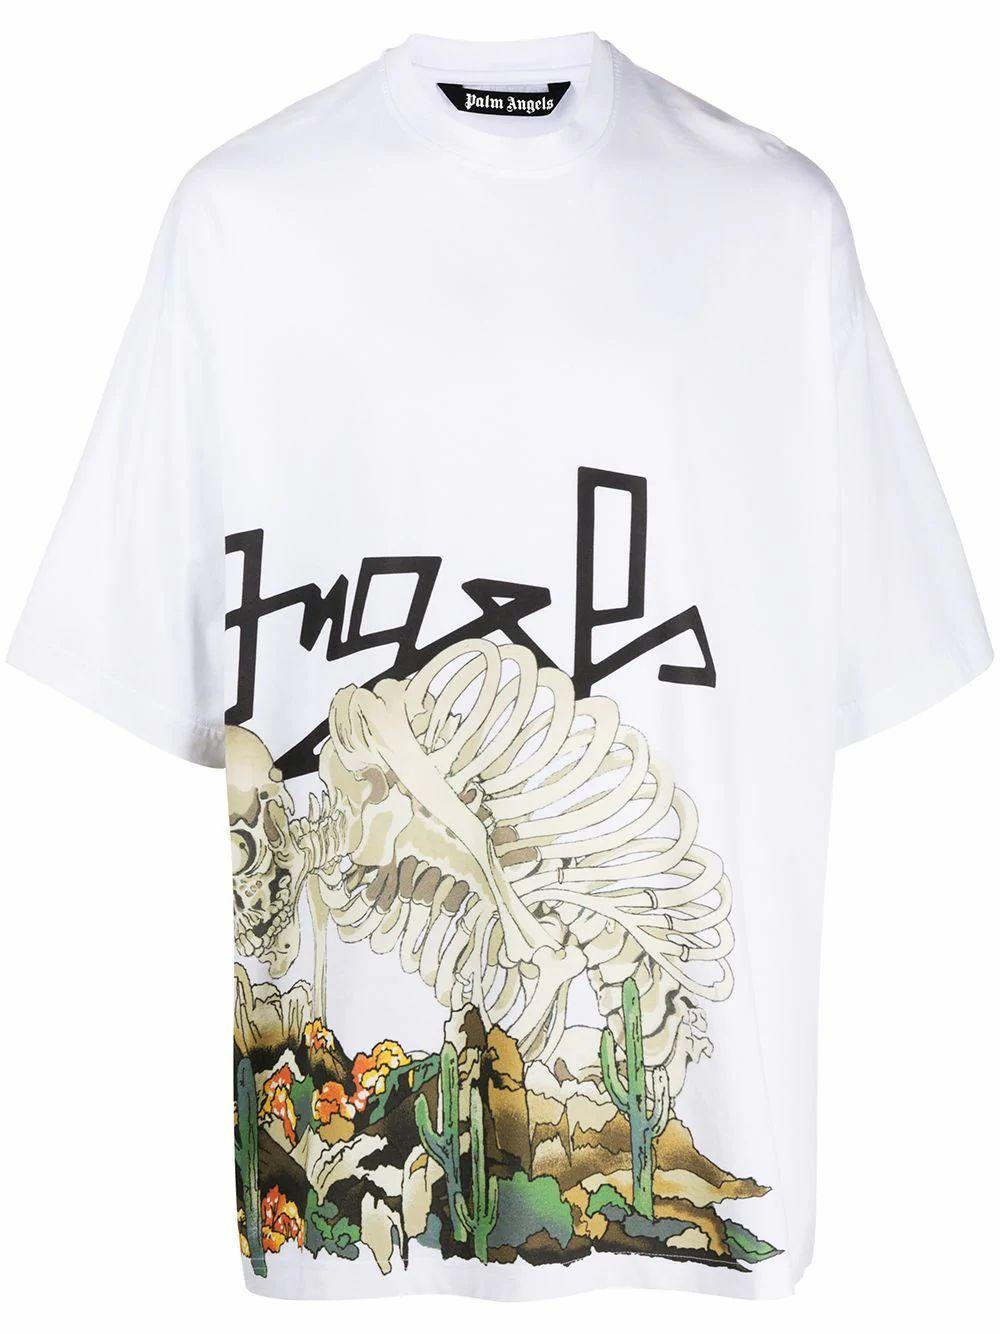 Palm Angels Cotton T-shirt in White for Men - Lyst